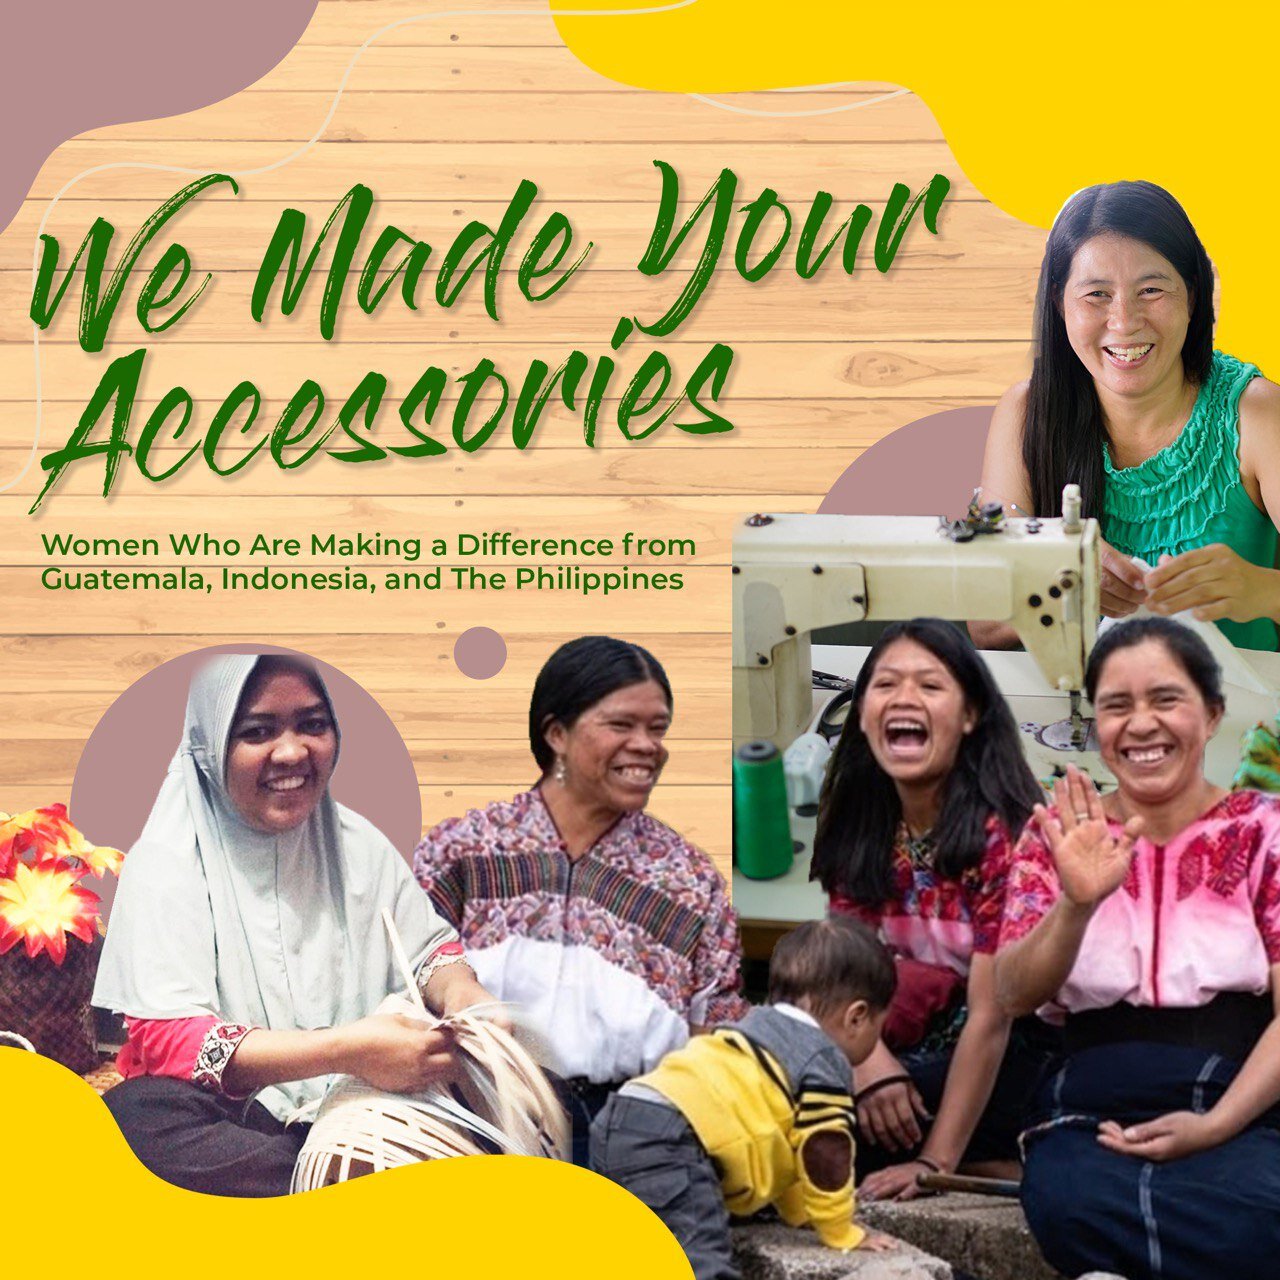 Who Made Your Accessories? Women Who Are Making a Difference from Guatemala, Indonesia, Philippines